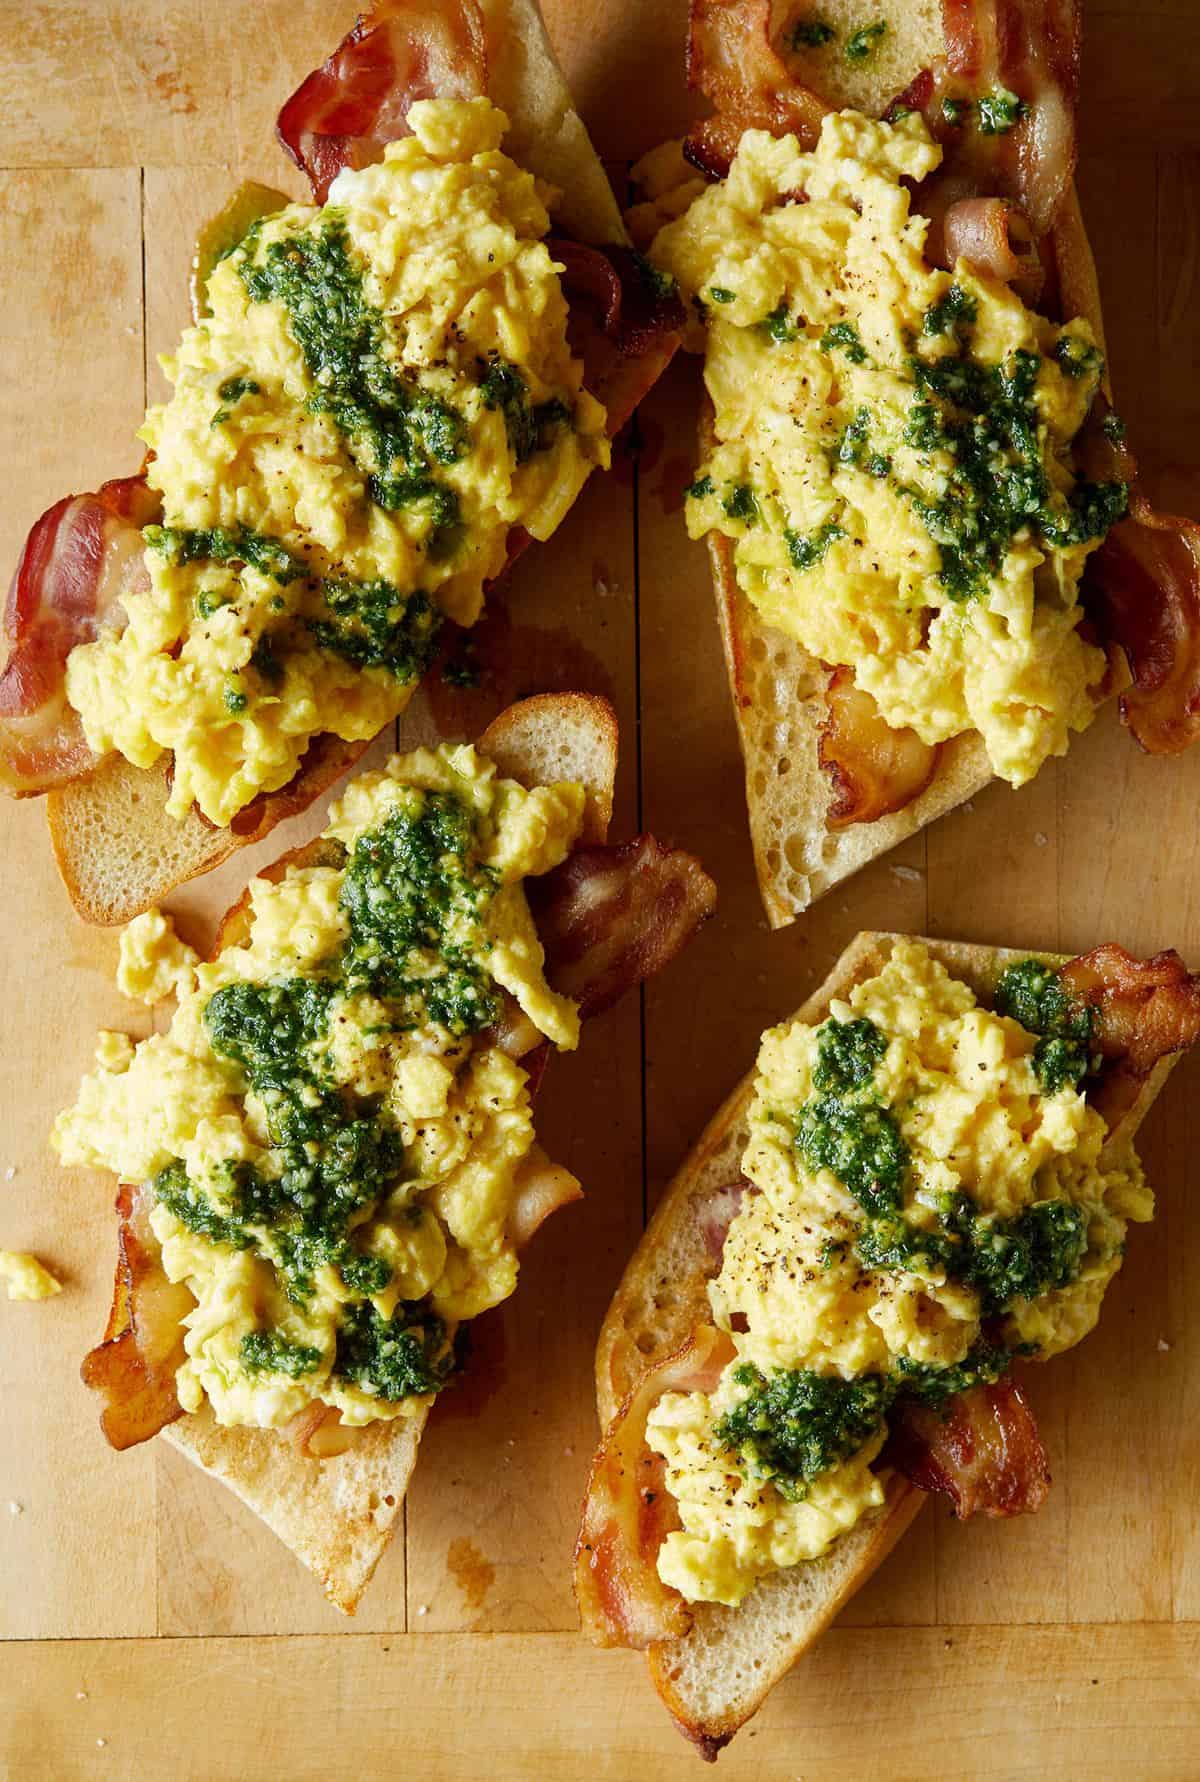 A close up of pesto topped scrambled eggs and bacon over toasted baguette.